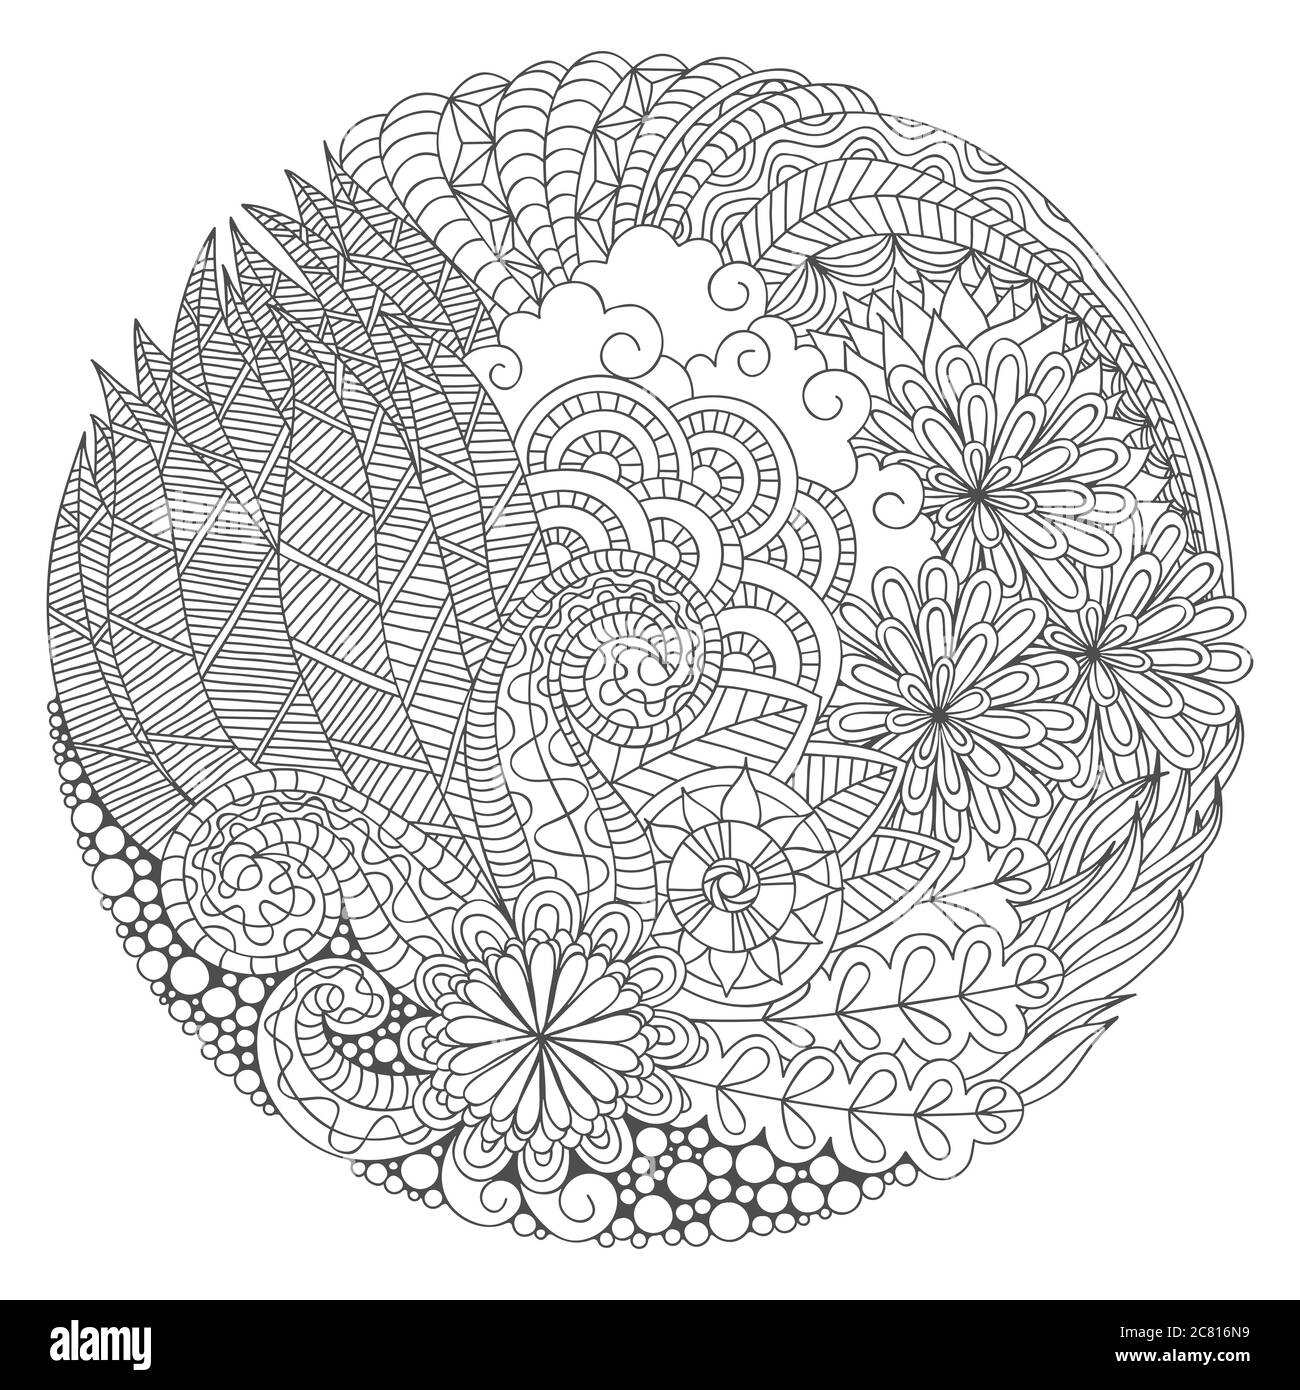 coloring page with hand drawn round detailed floral composition ...